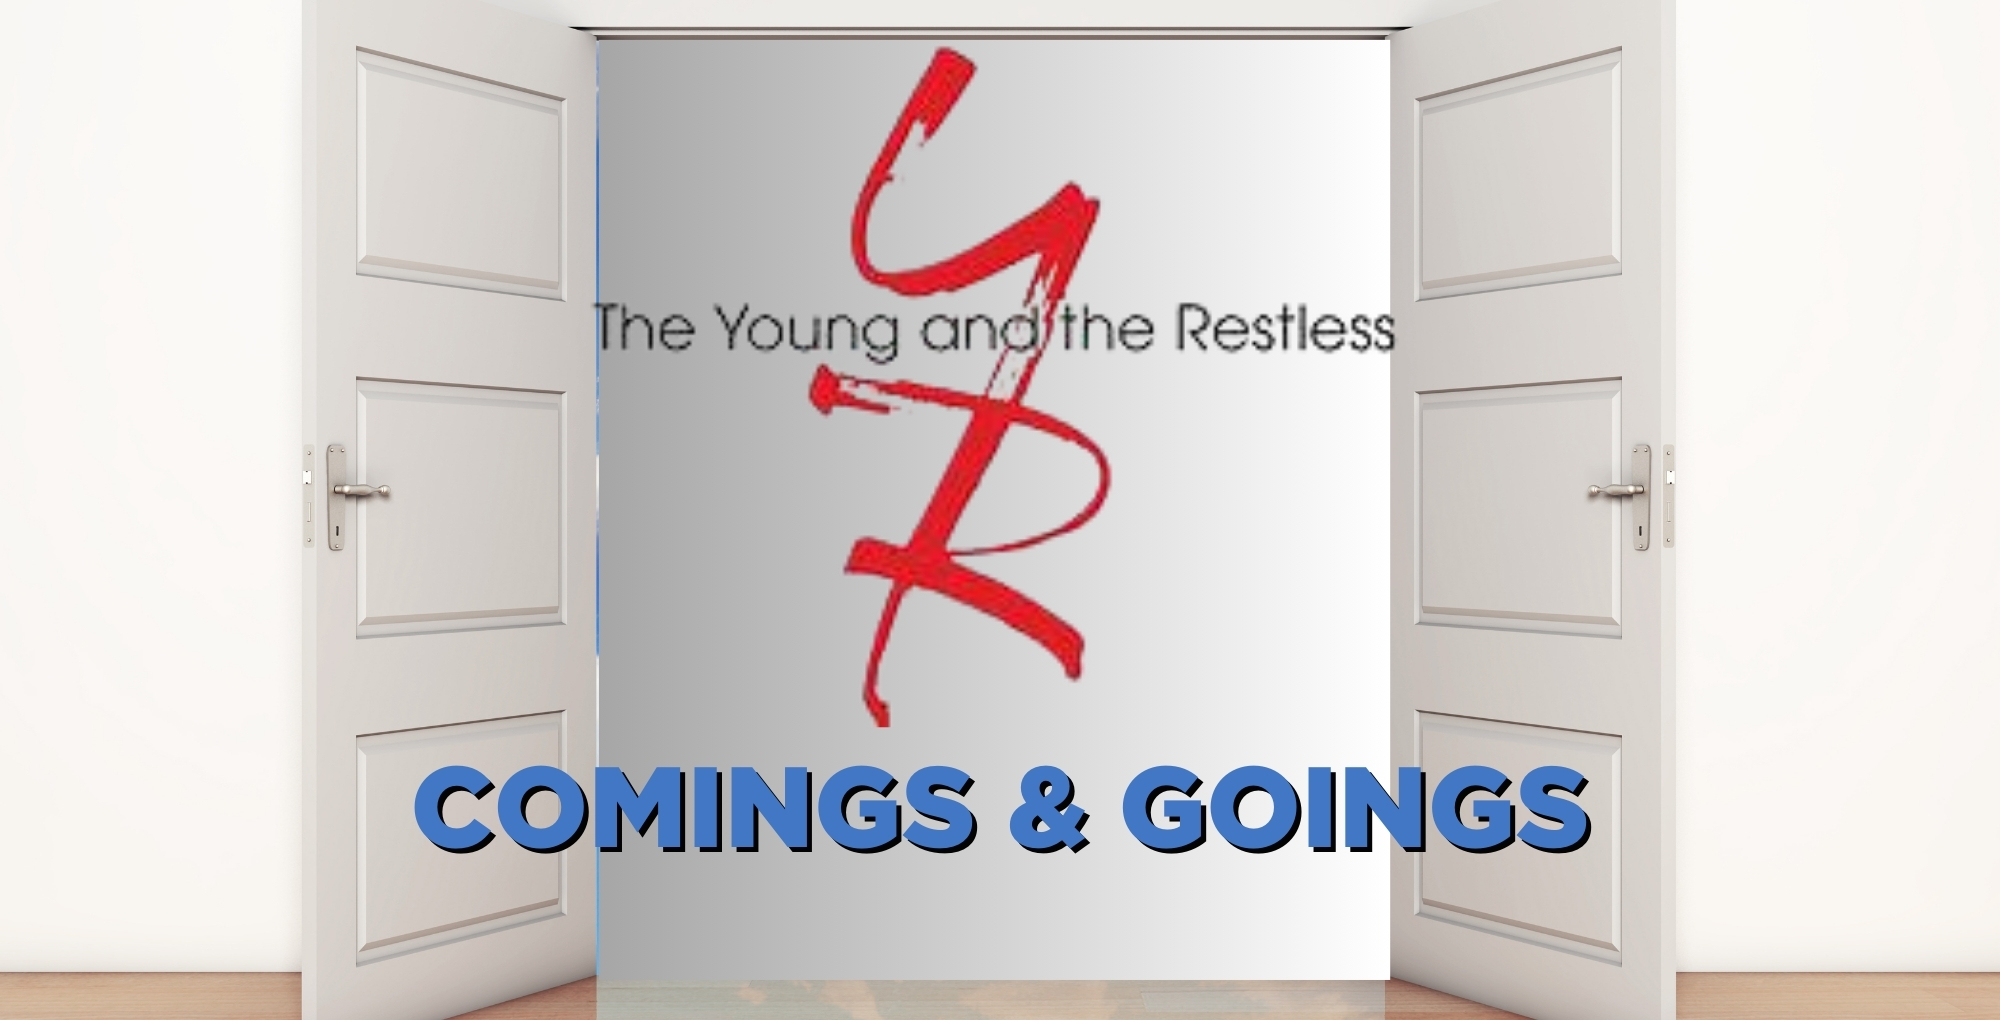 The Young and the Restless comings and goings for t.